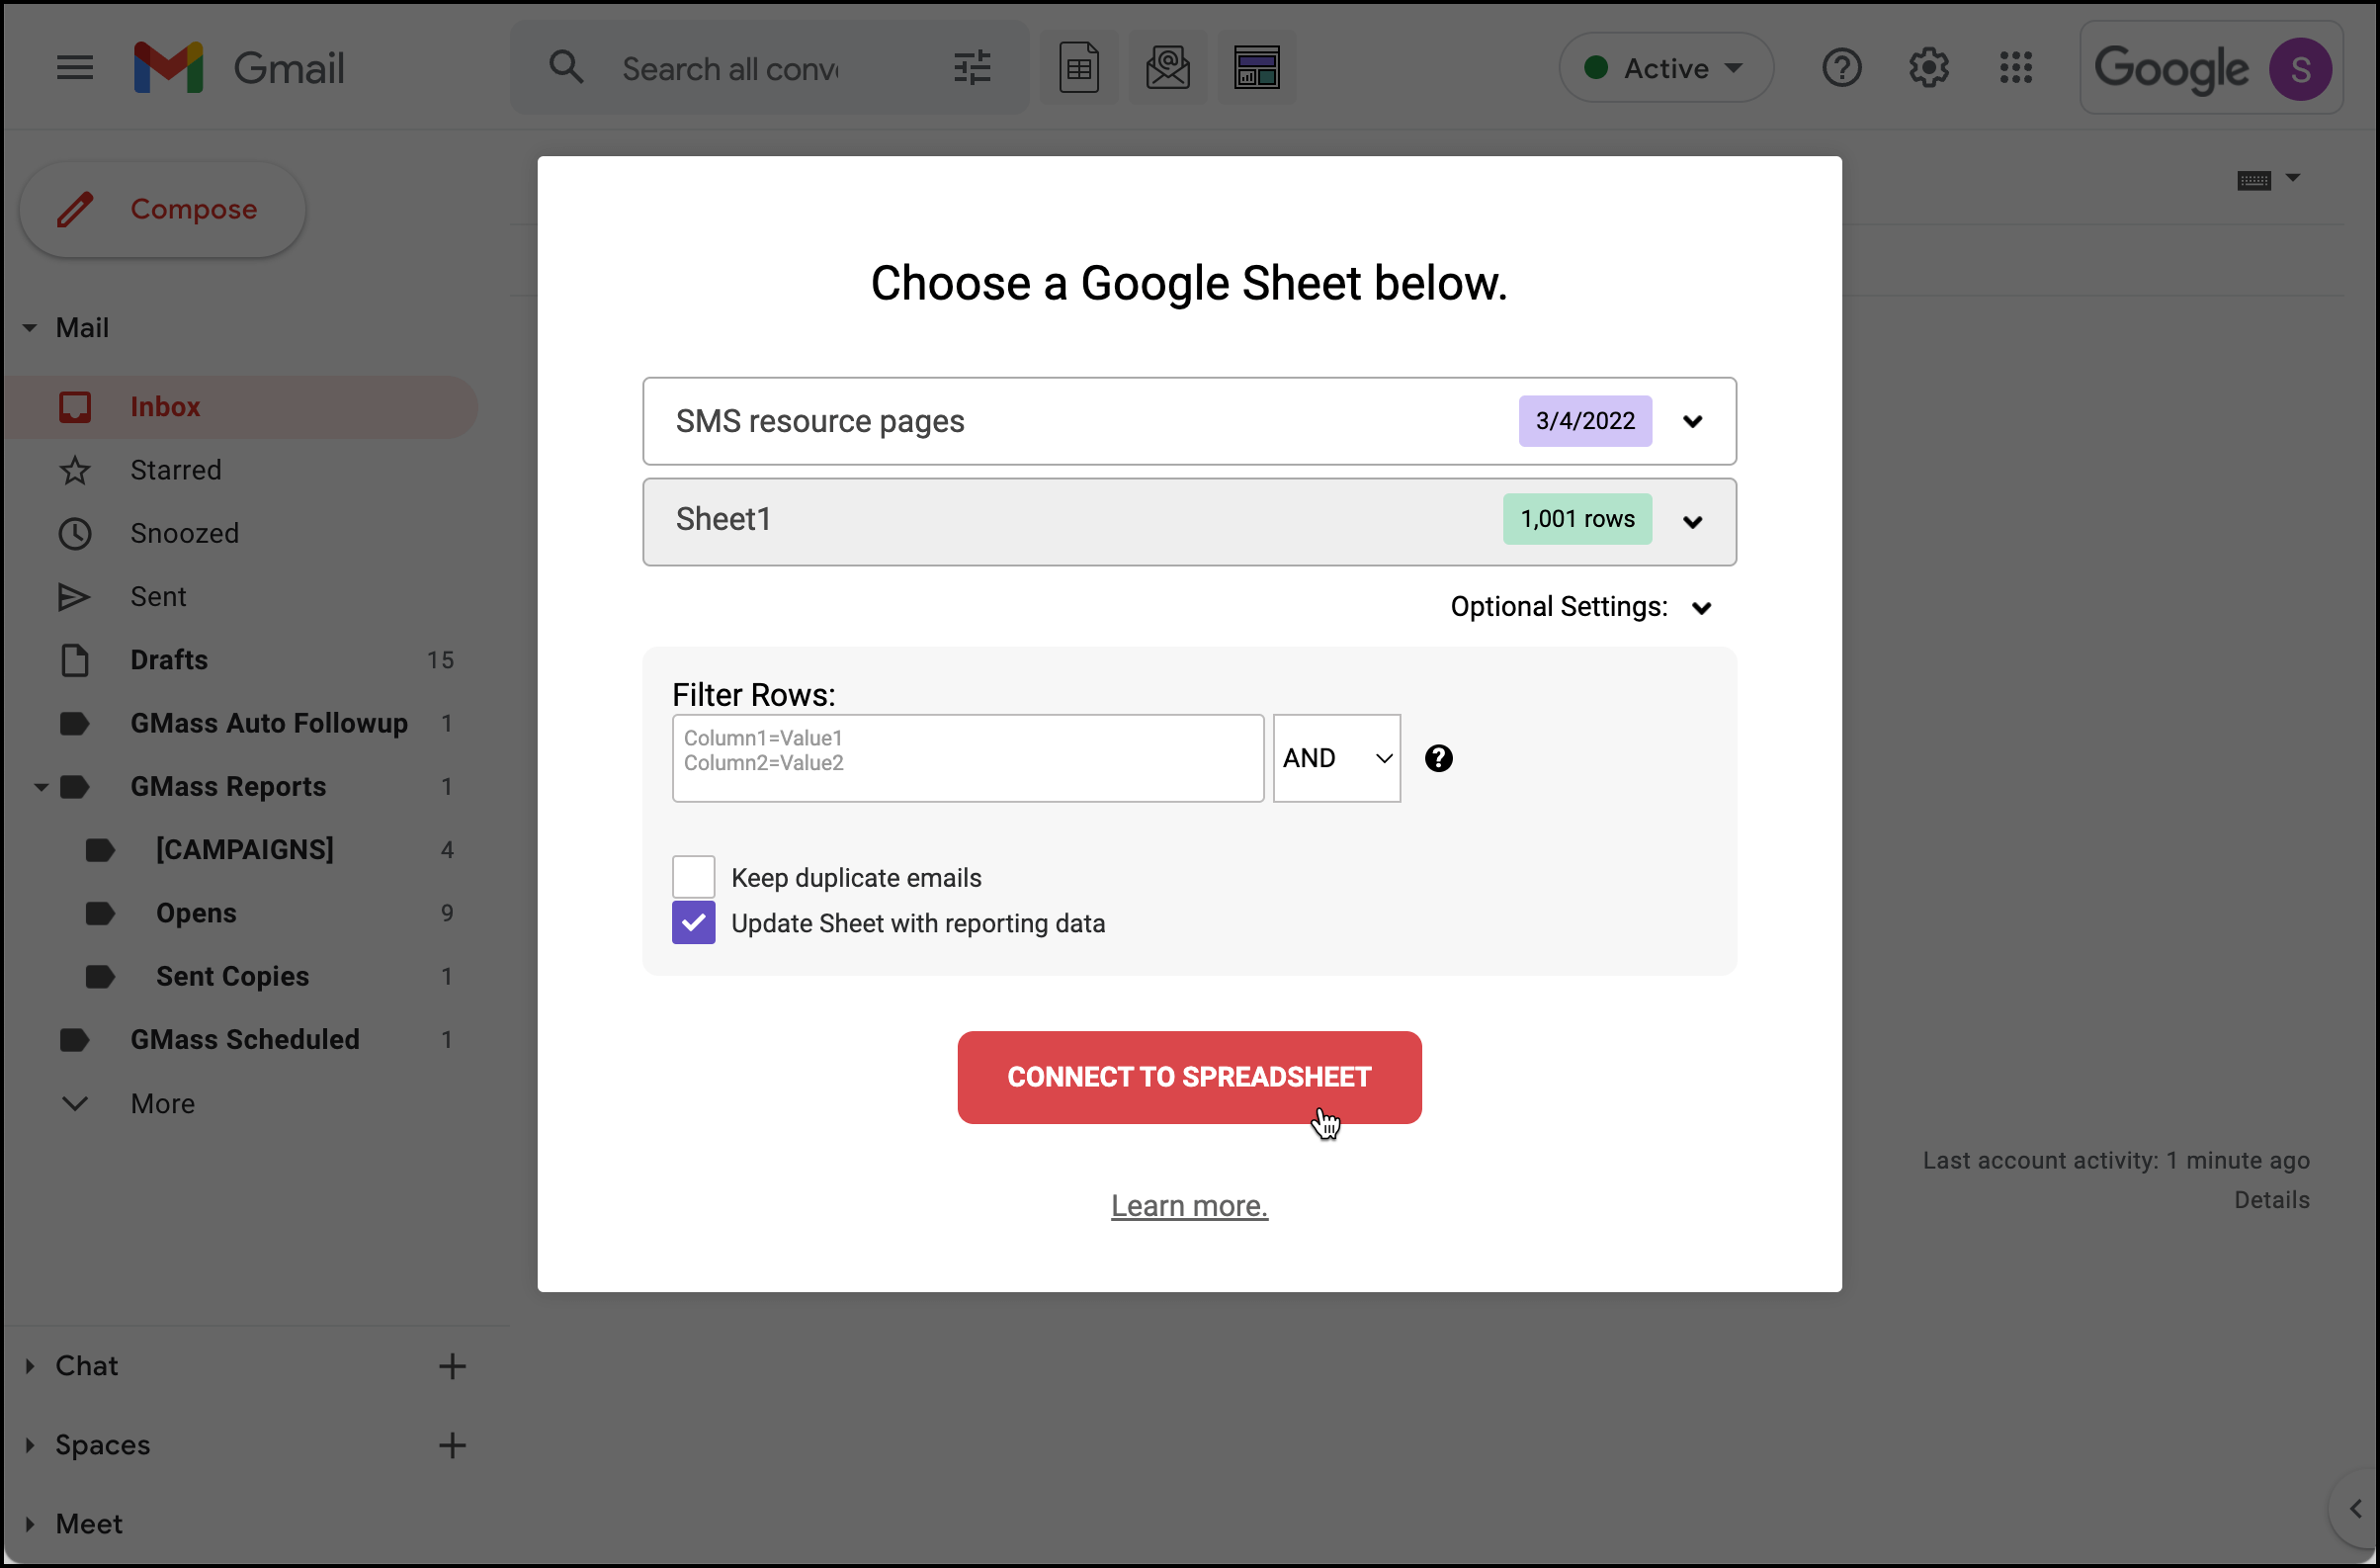 Connect your Google Sheet of prospects to GMass.